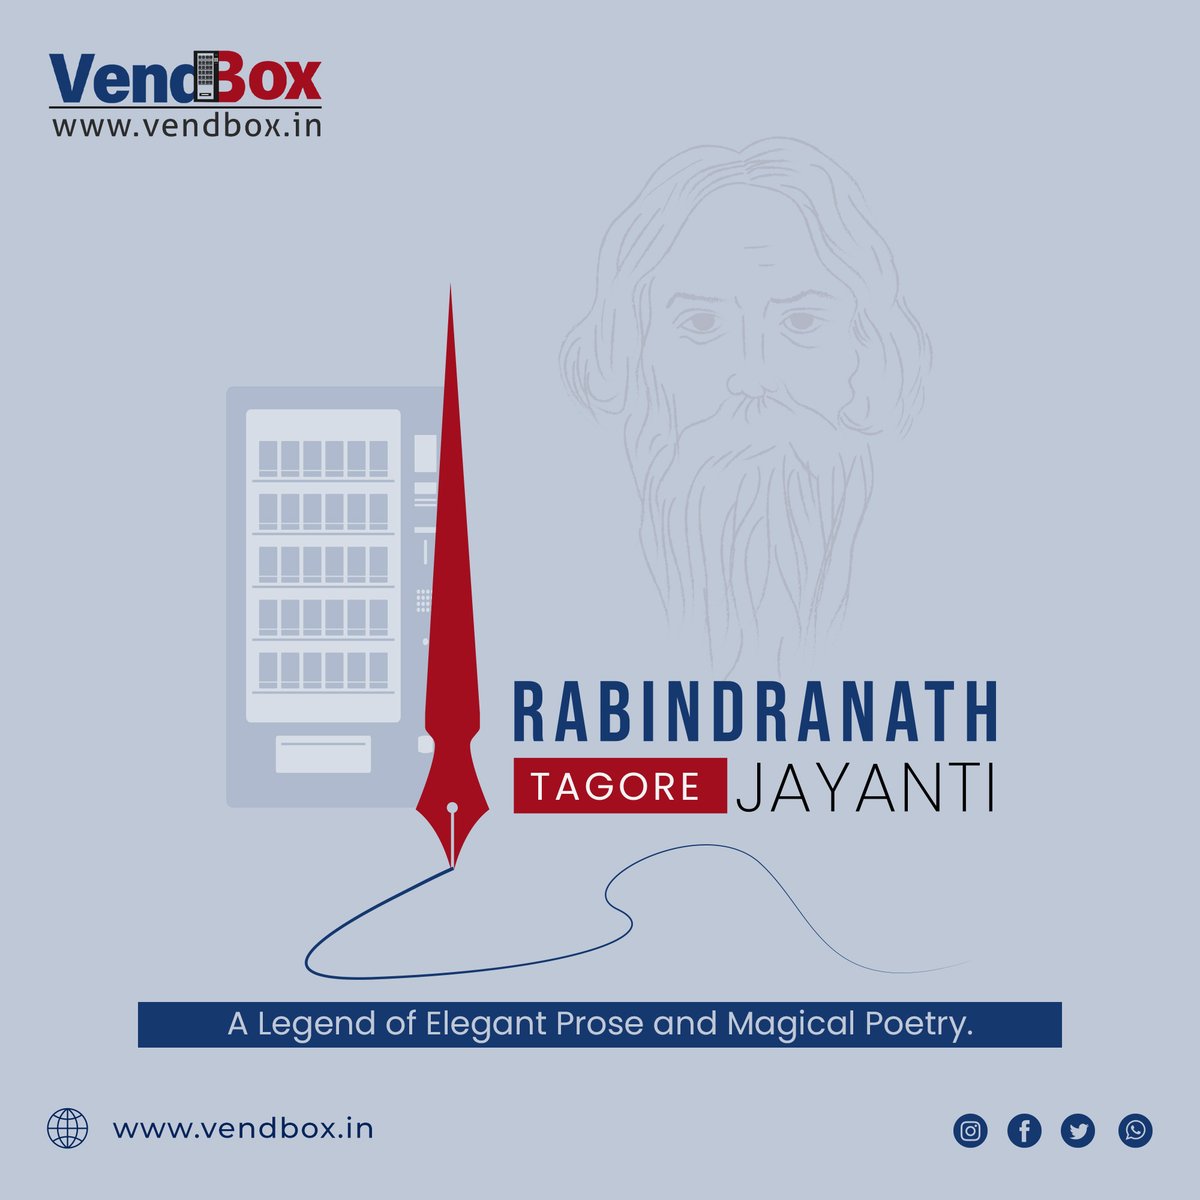 Happy Rabindranath Tagore Jayanti! May the poet's words continue to be a beacon of light in the darkness of our world.

#rabindranathtagorejayanti #tagorejayanti #gurudev #tagore #poet #philosopher #bengaliliterature #indianpoet #tagorepoetry #vendbox